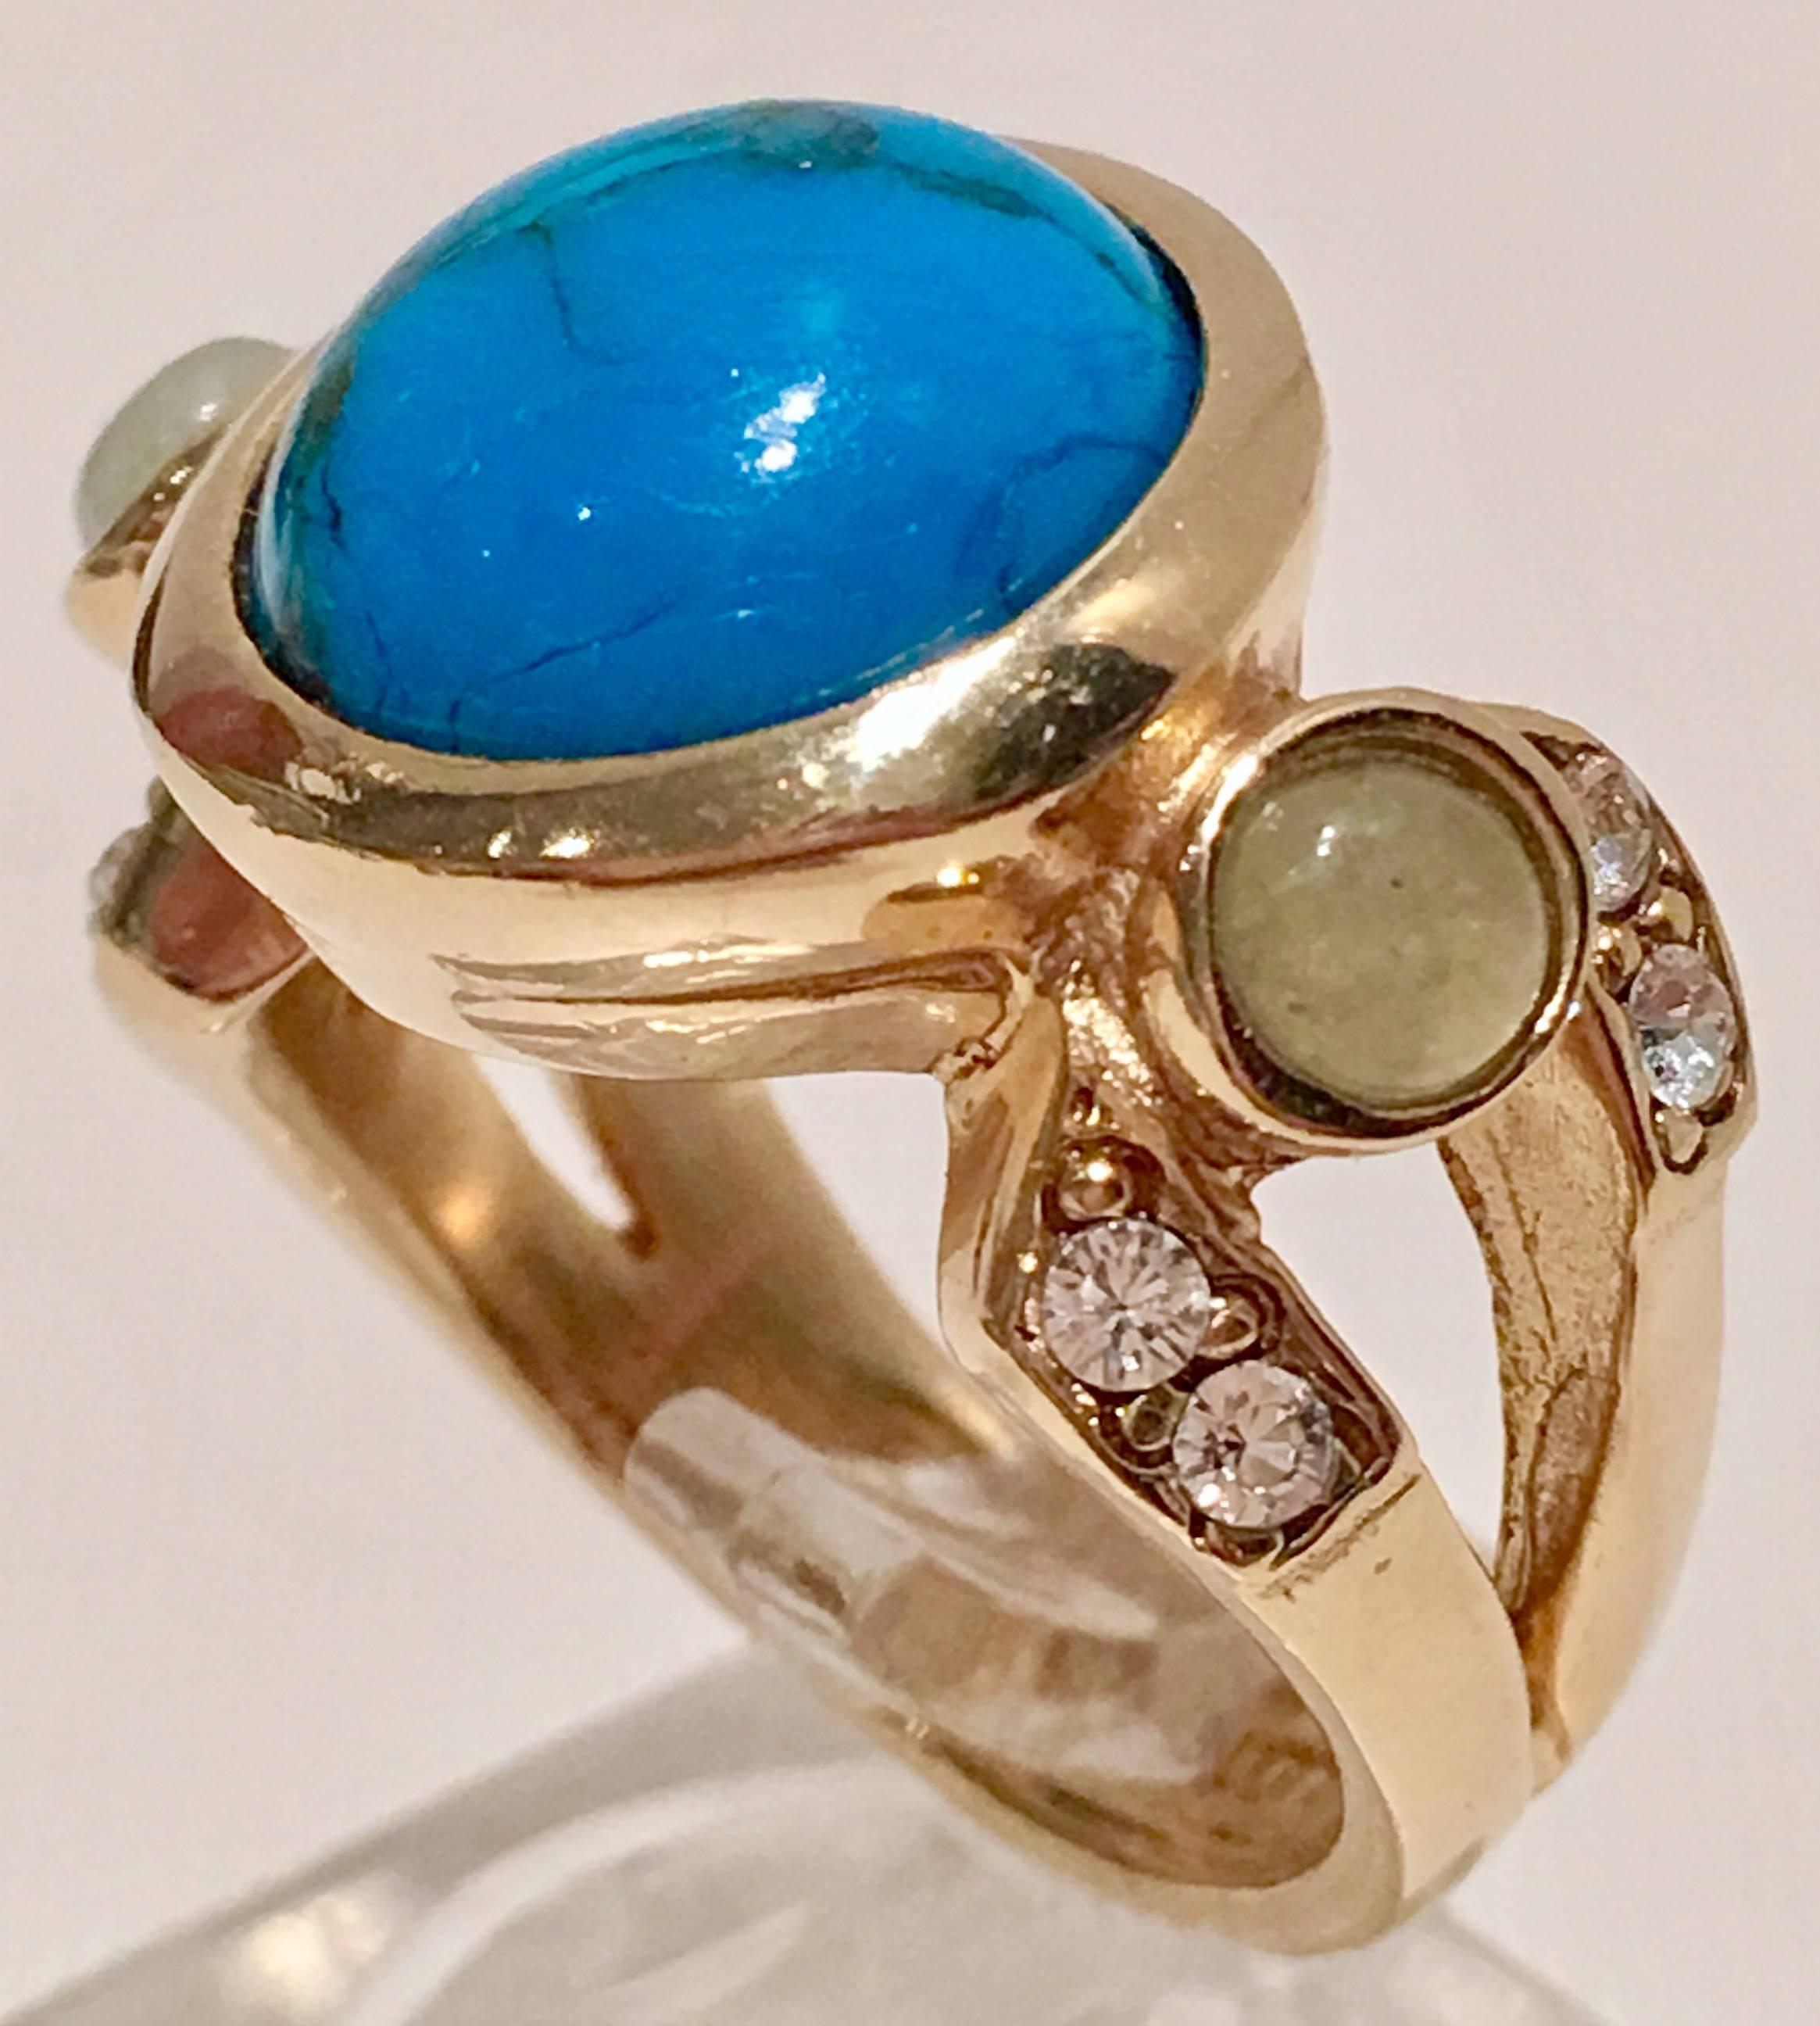 Contemporary Judith Leiber round turquoise center stone with two round green aventurine side stone and Austrian cut crystal stone detail. Features a gold plate over brass setting. Includes original Judith Leiber protective storage box. Ring Size